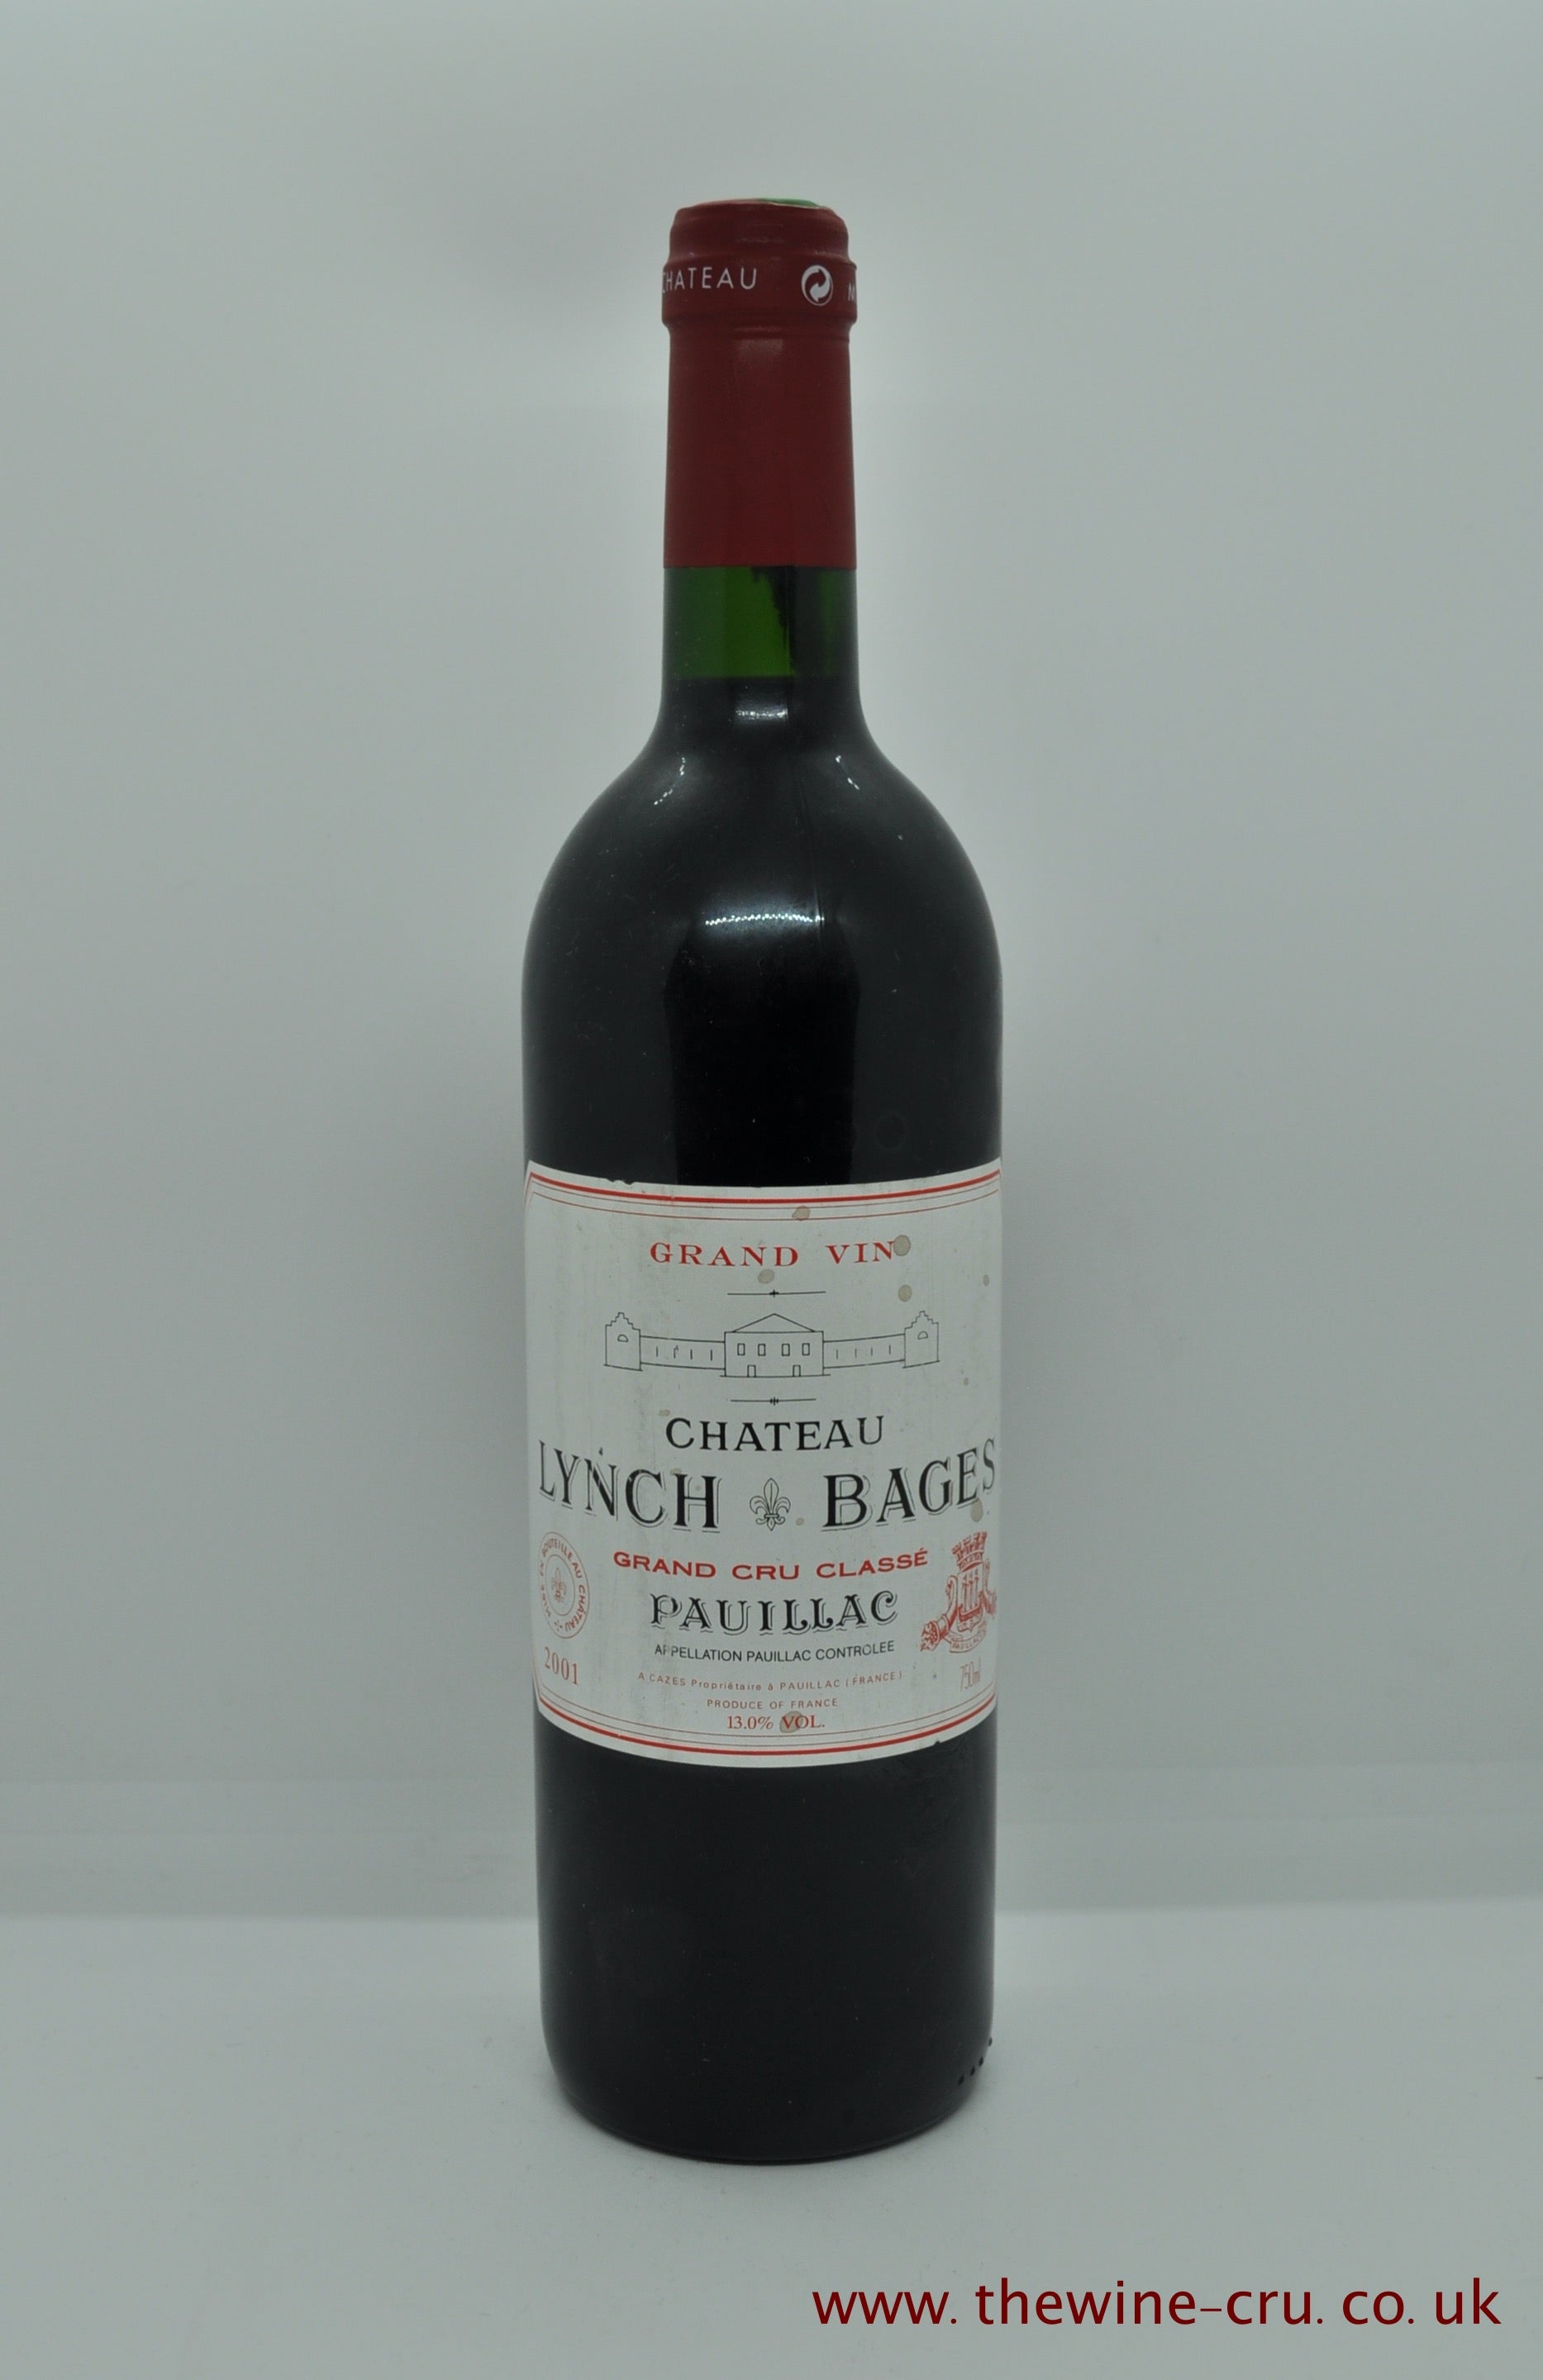 2001 vintage red wine. Chateau Lynch Bages 2001. France Bordeaux. Immediate delivery. Free local delivery. Gift wrapping available.